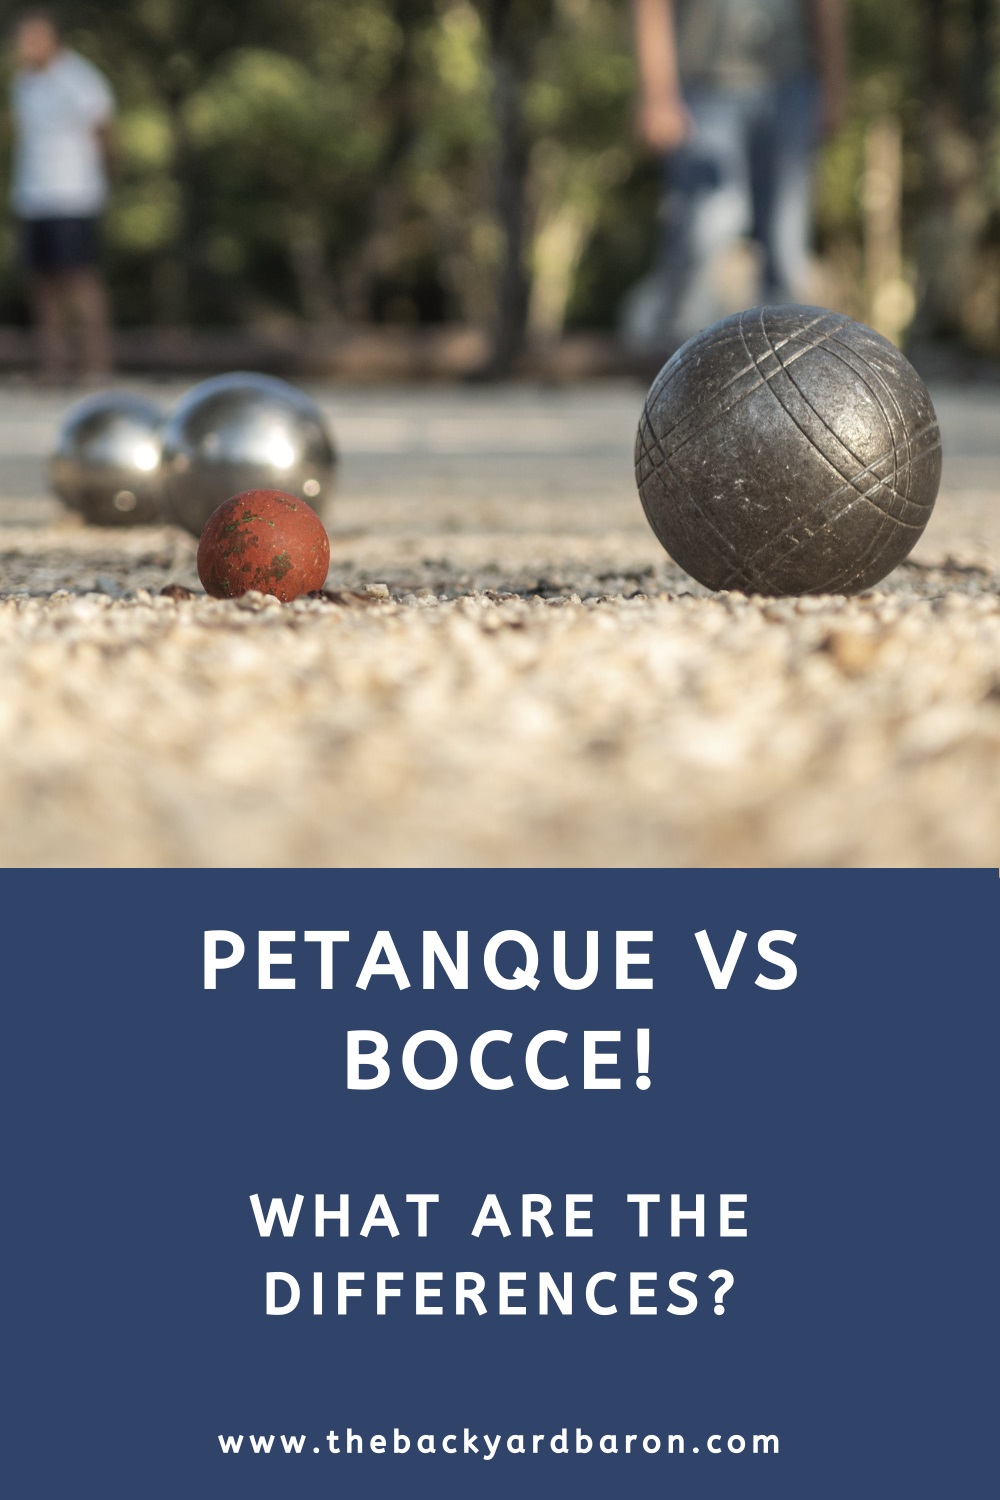 Petanque vs Bocce (differences and similarities)